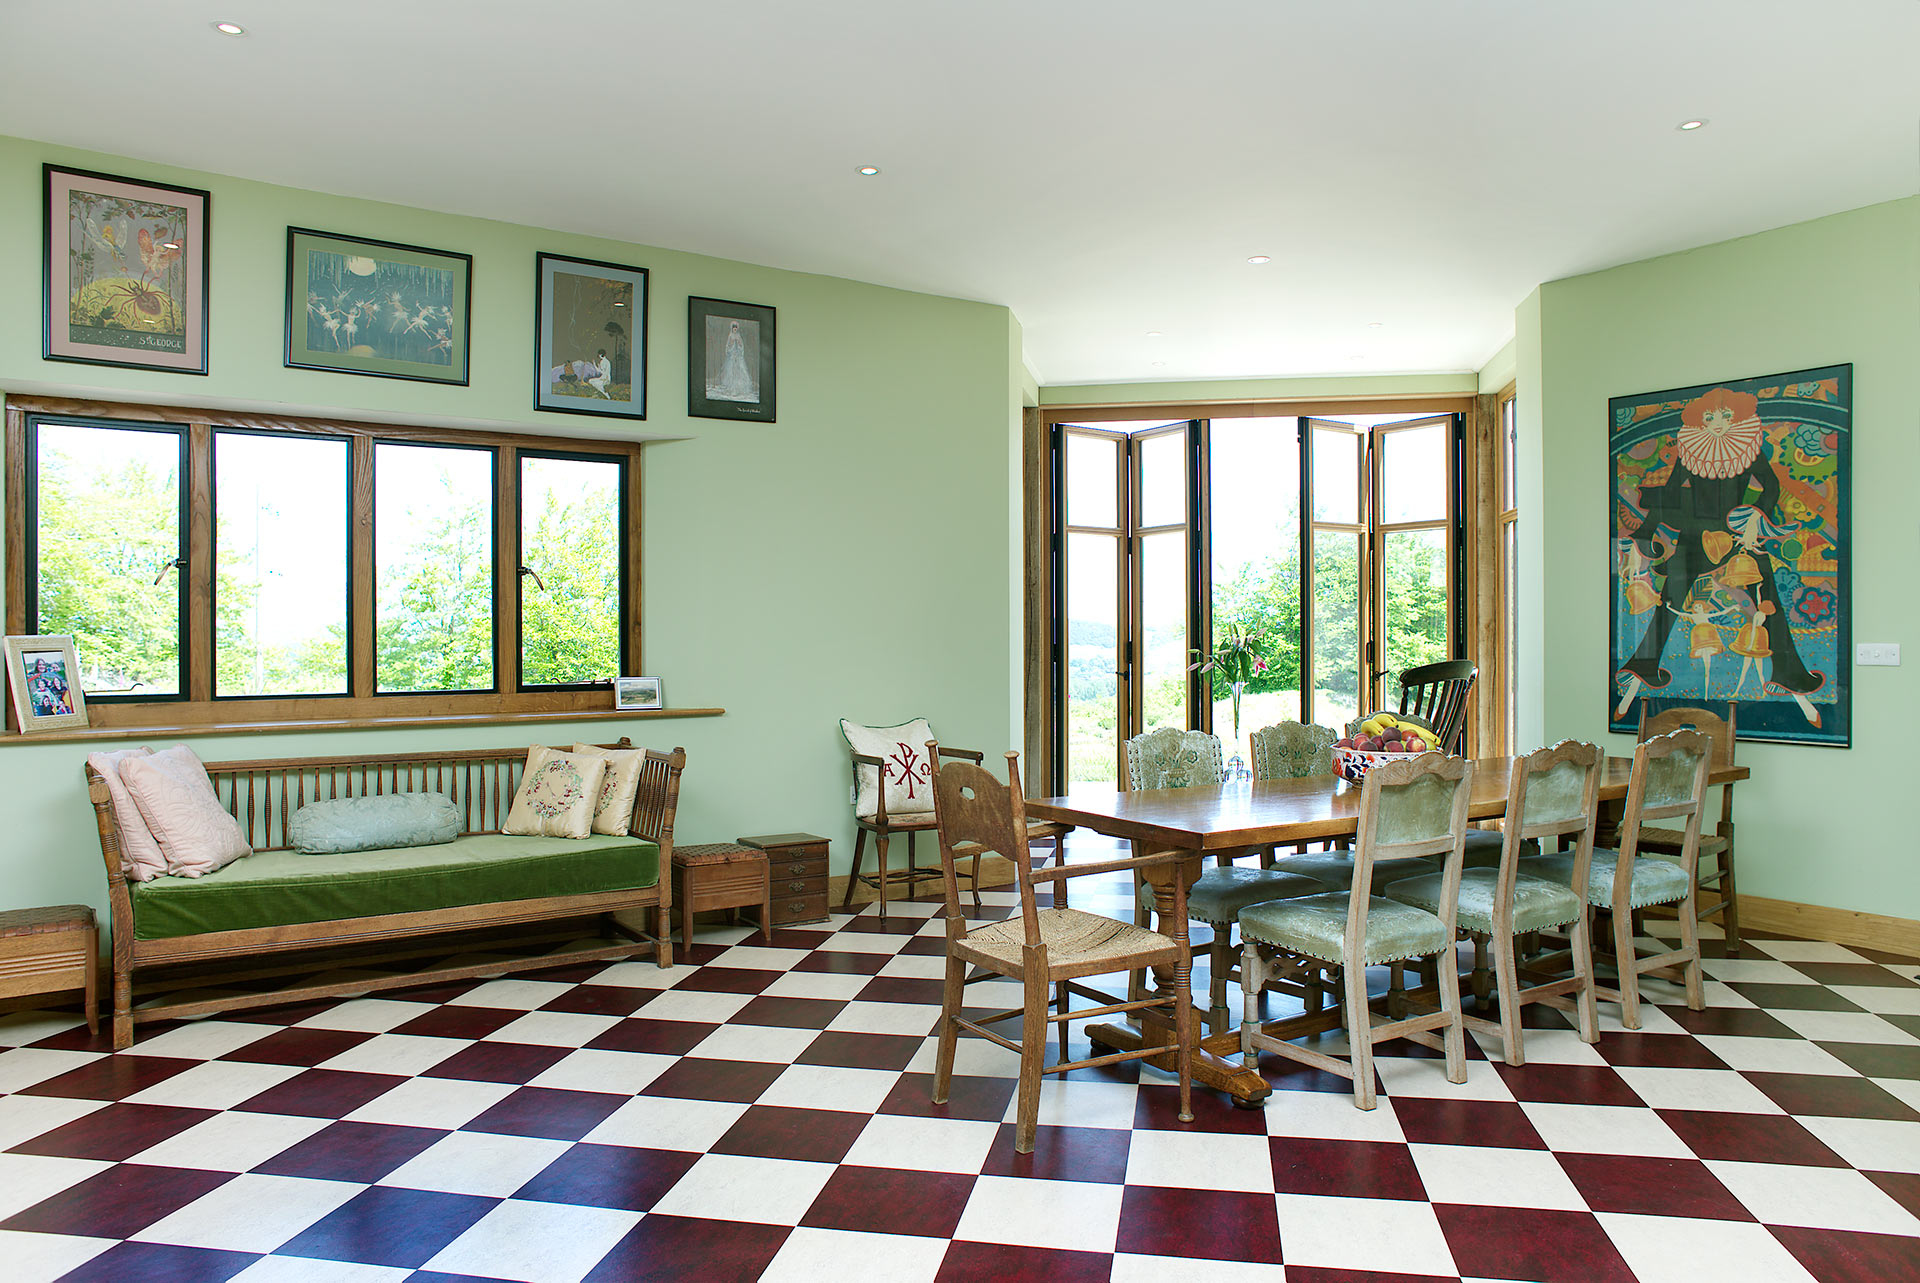 internal view of dining area with large patio doors and red and white checkered floor tiles